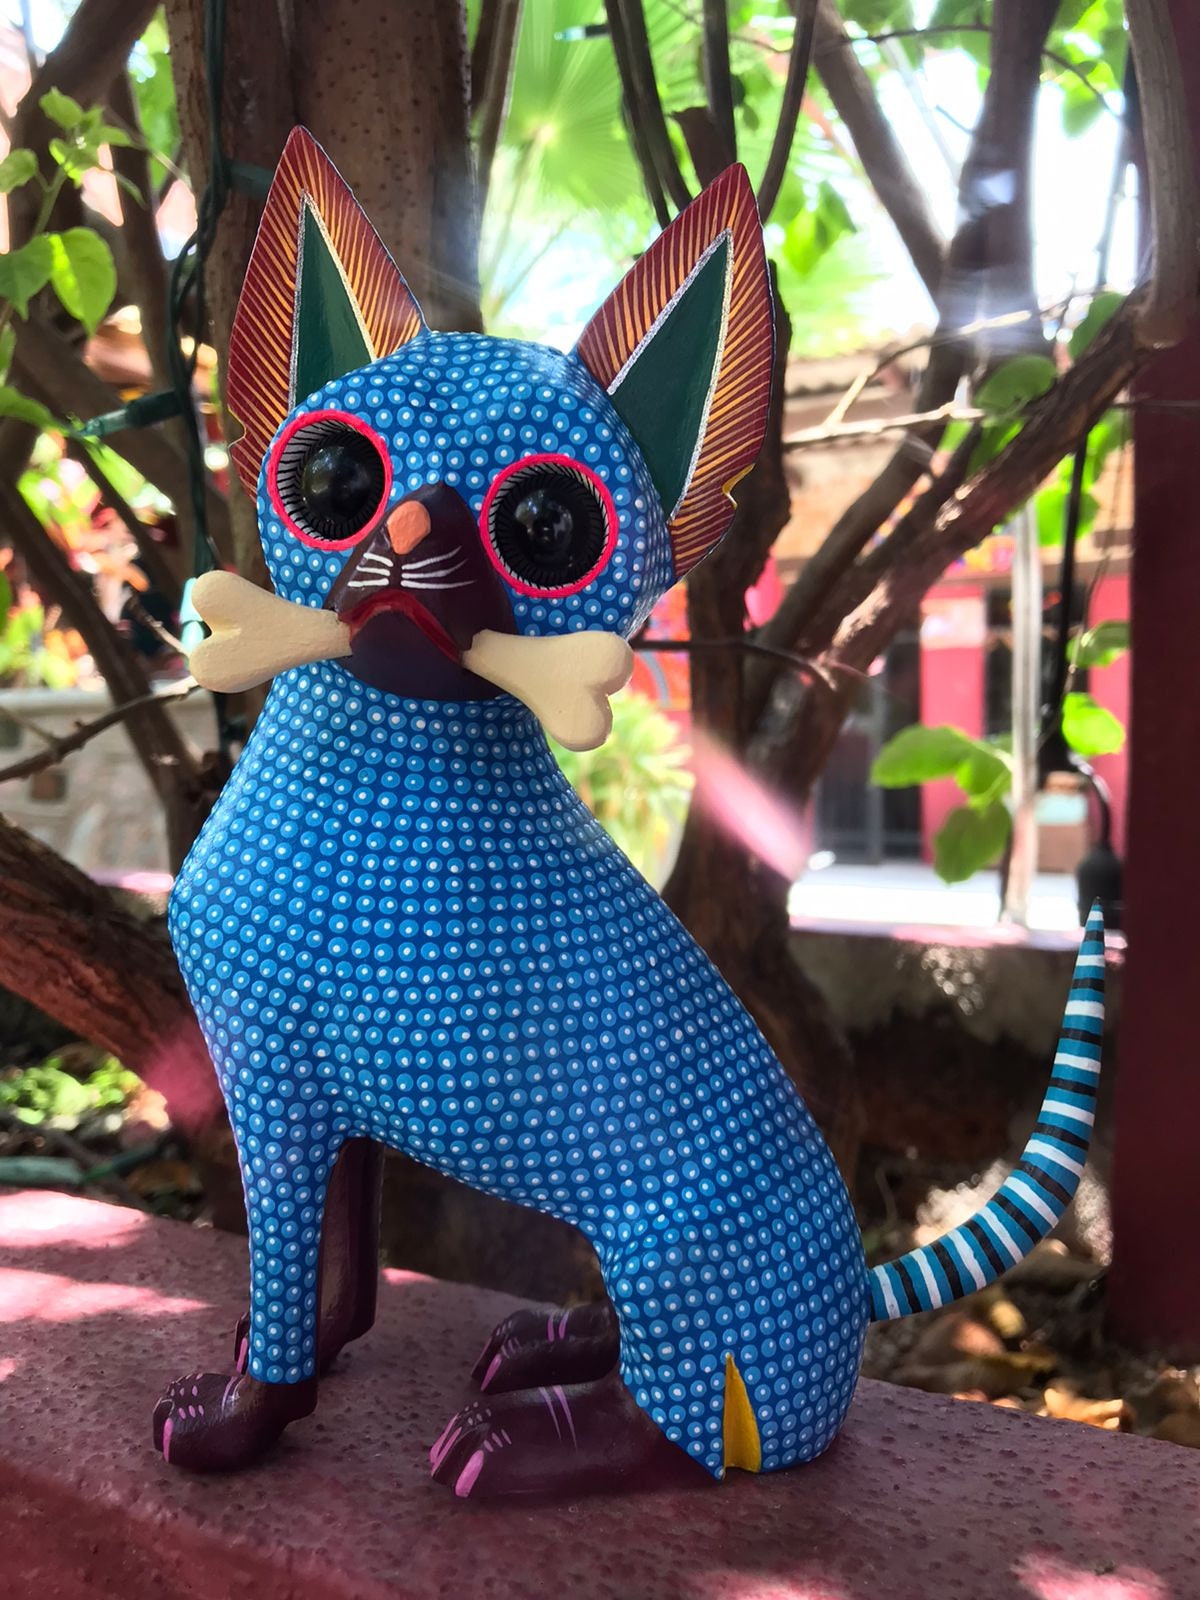 Great Mexican Oaxacan Wood Carving Alebrije Chihuahua By Isaac Fabian PP4540